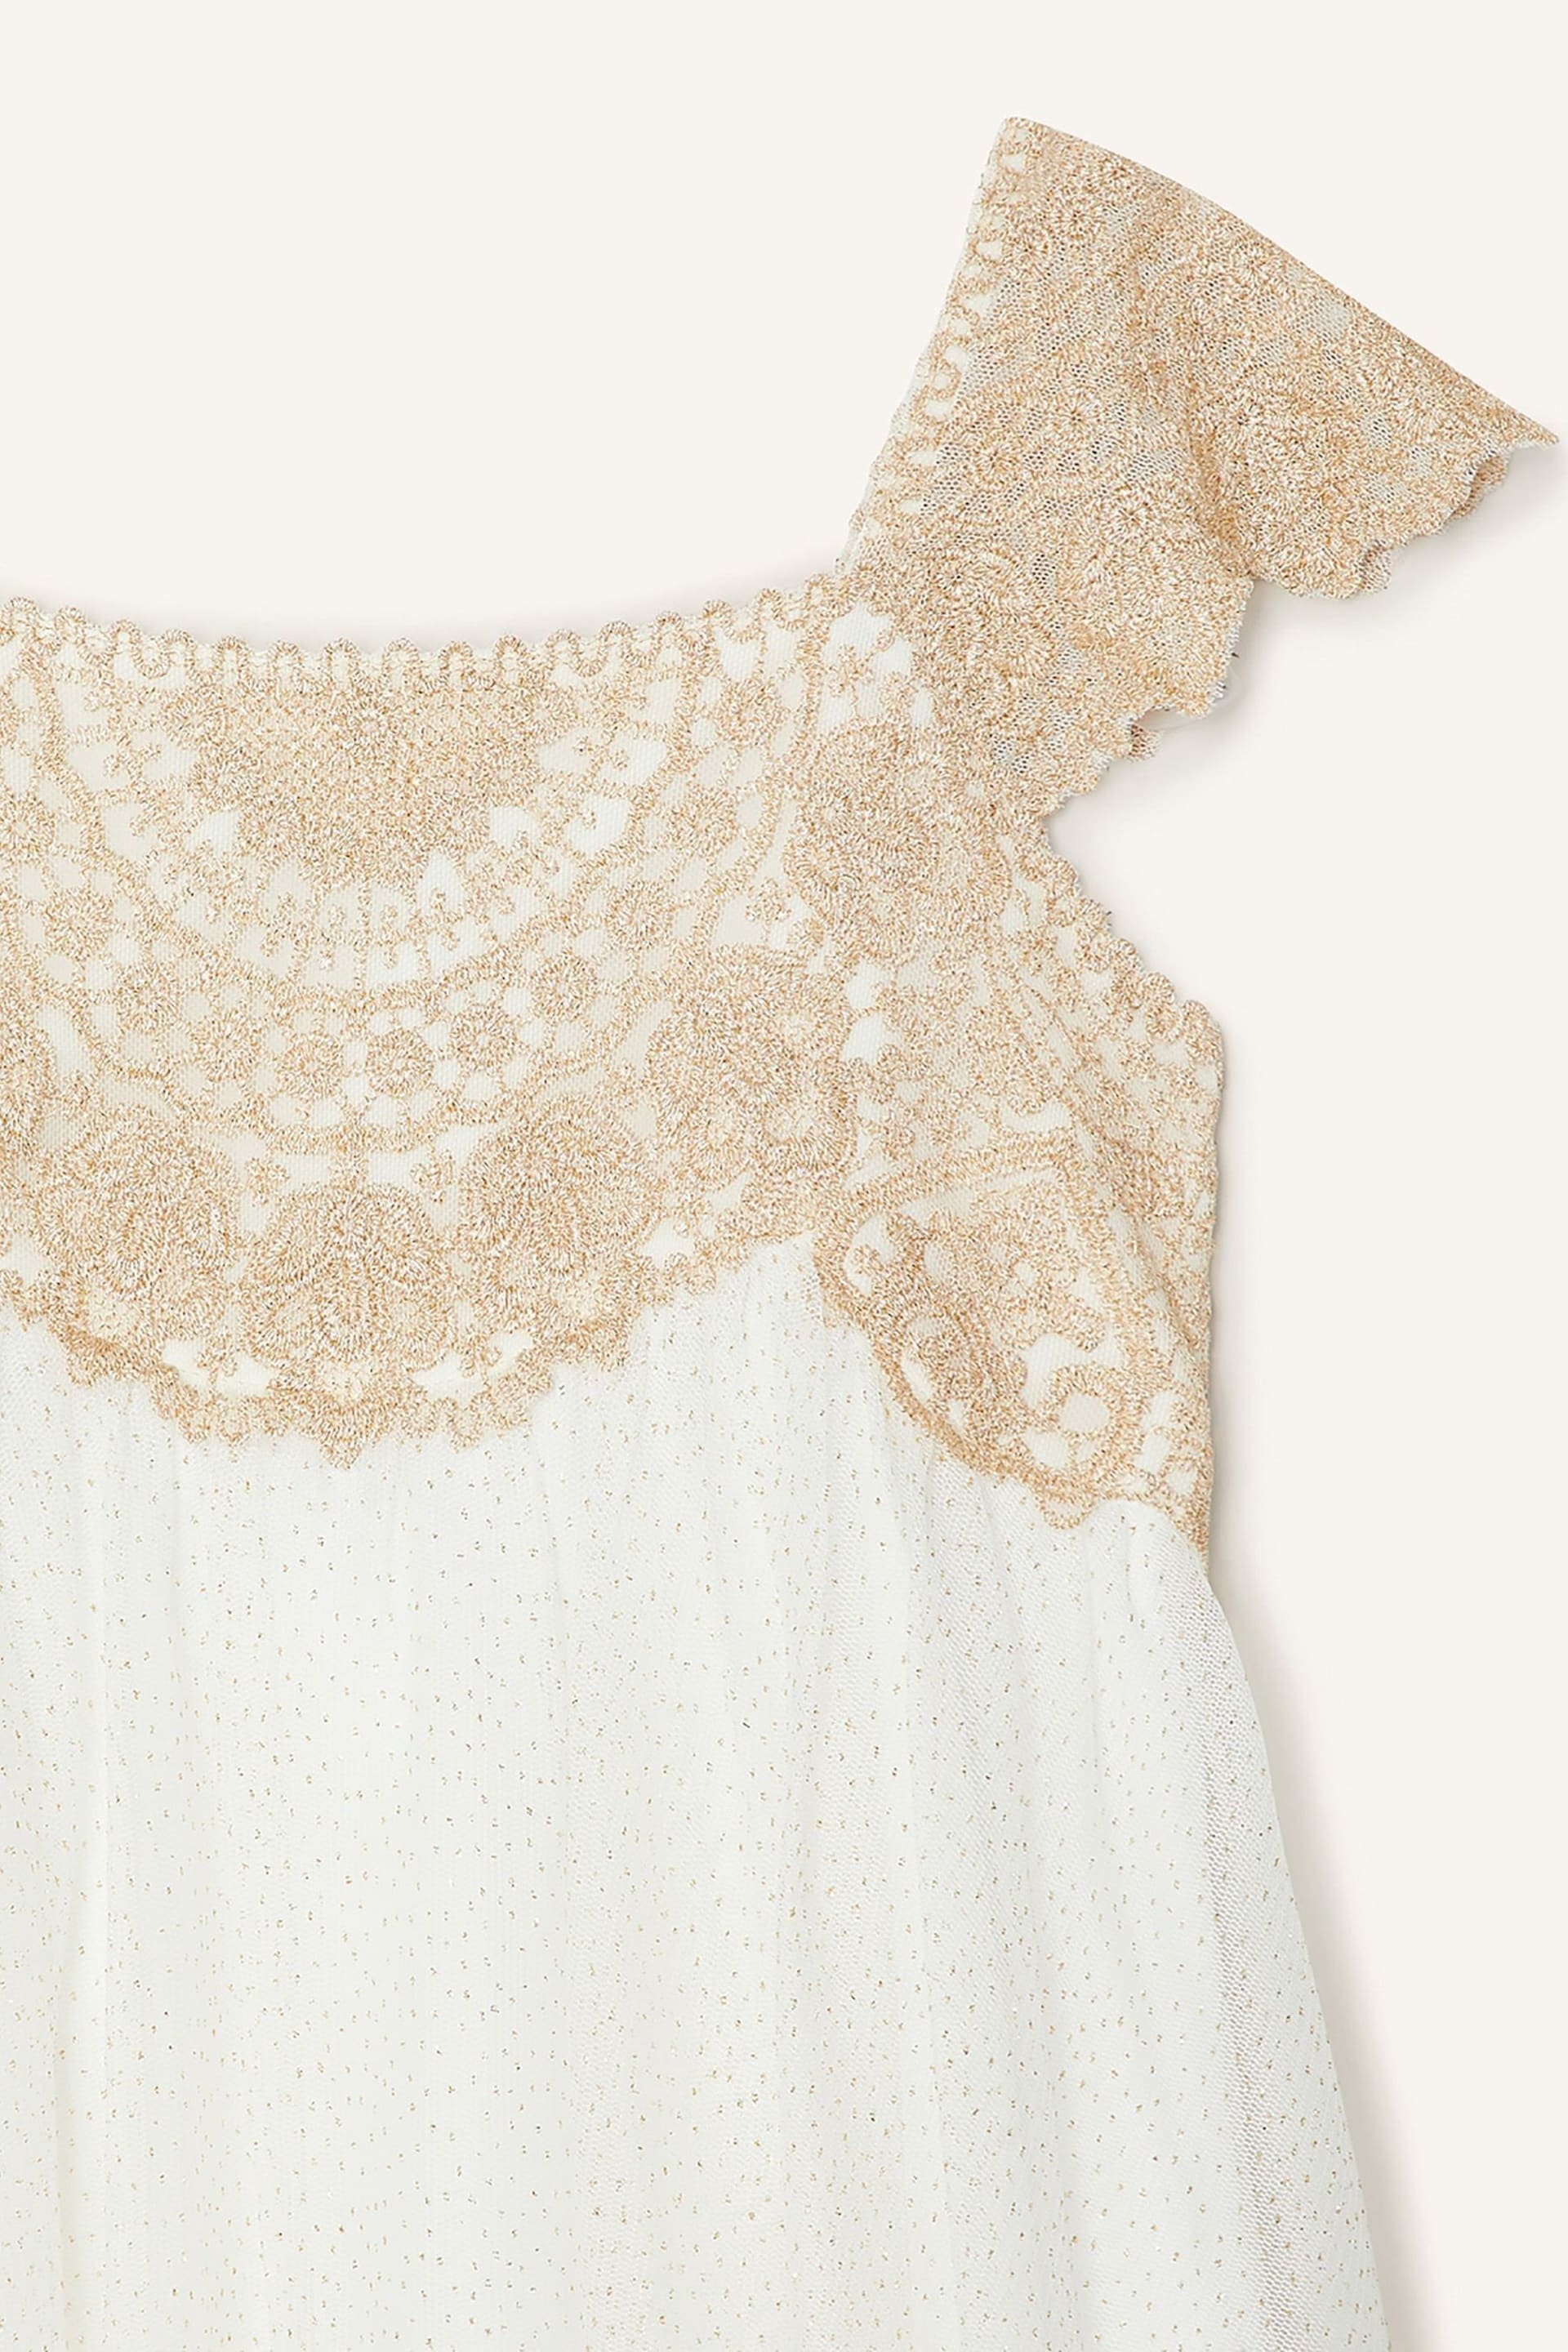 Monsoon Gold Estella Embroidered Dress - Image 3 of 3